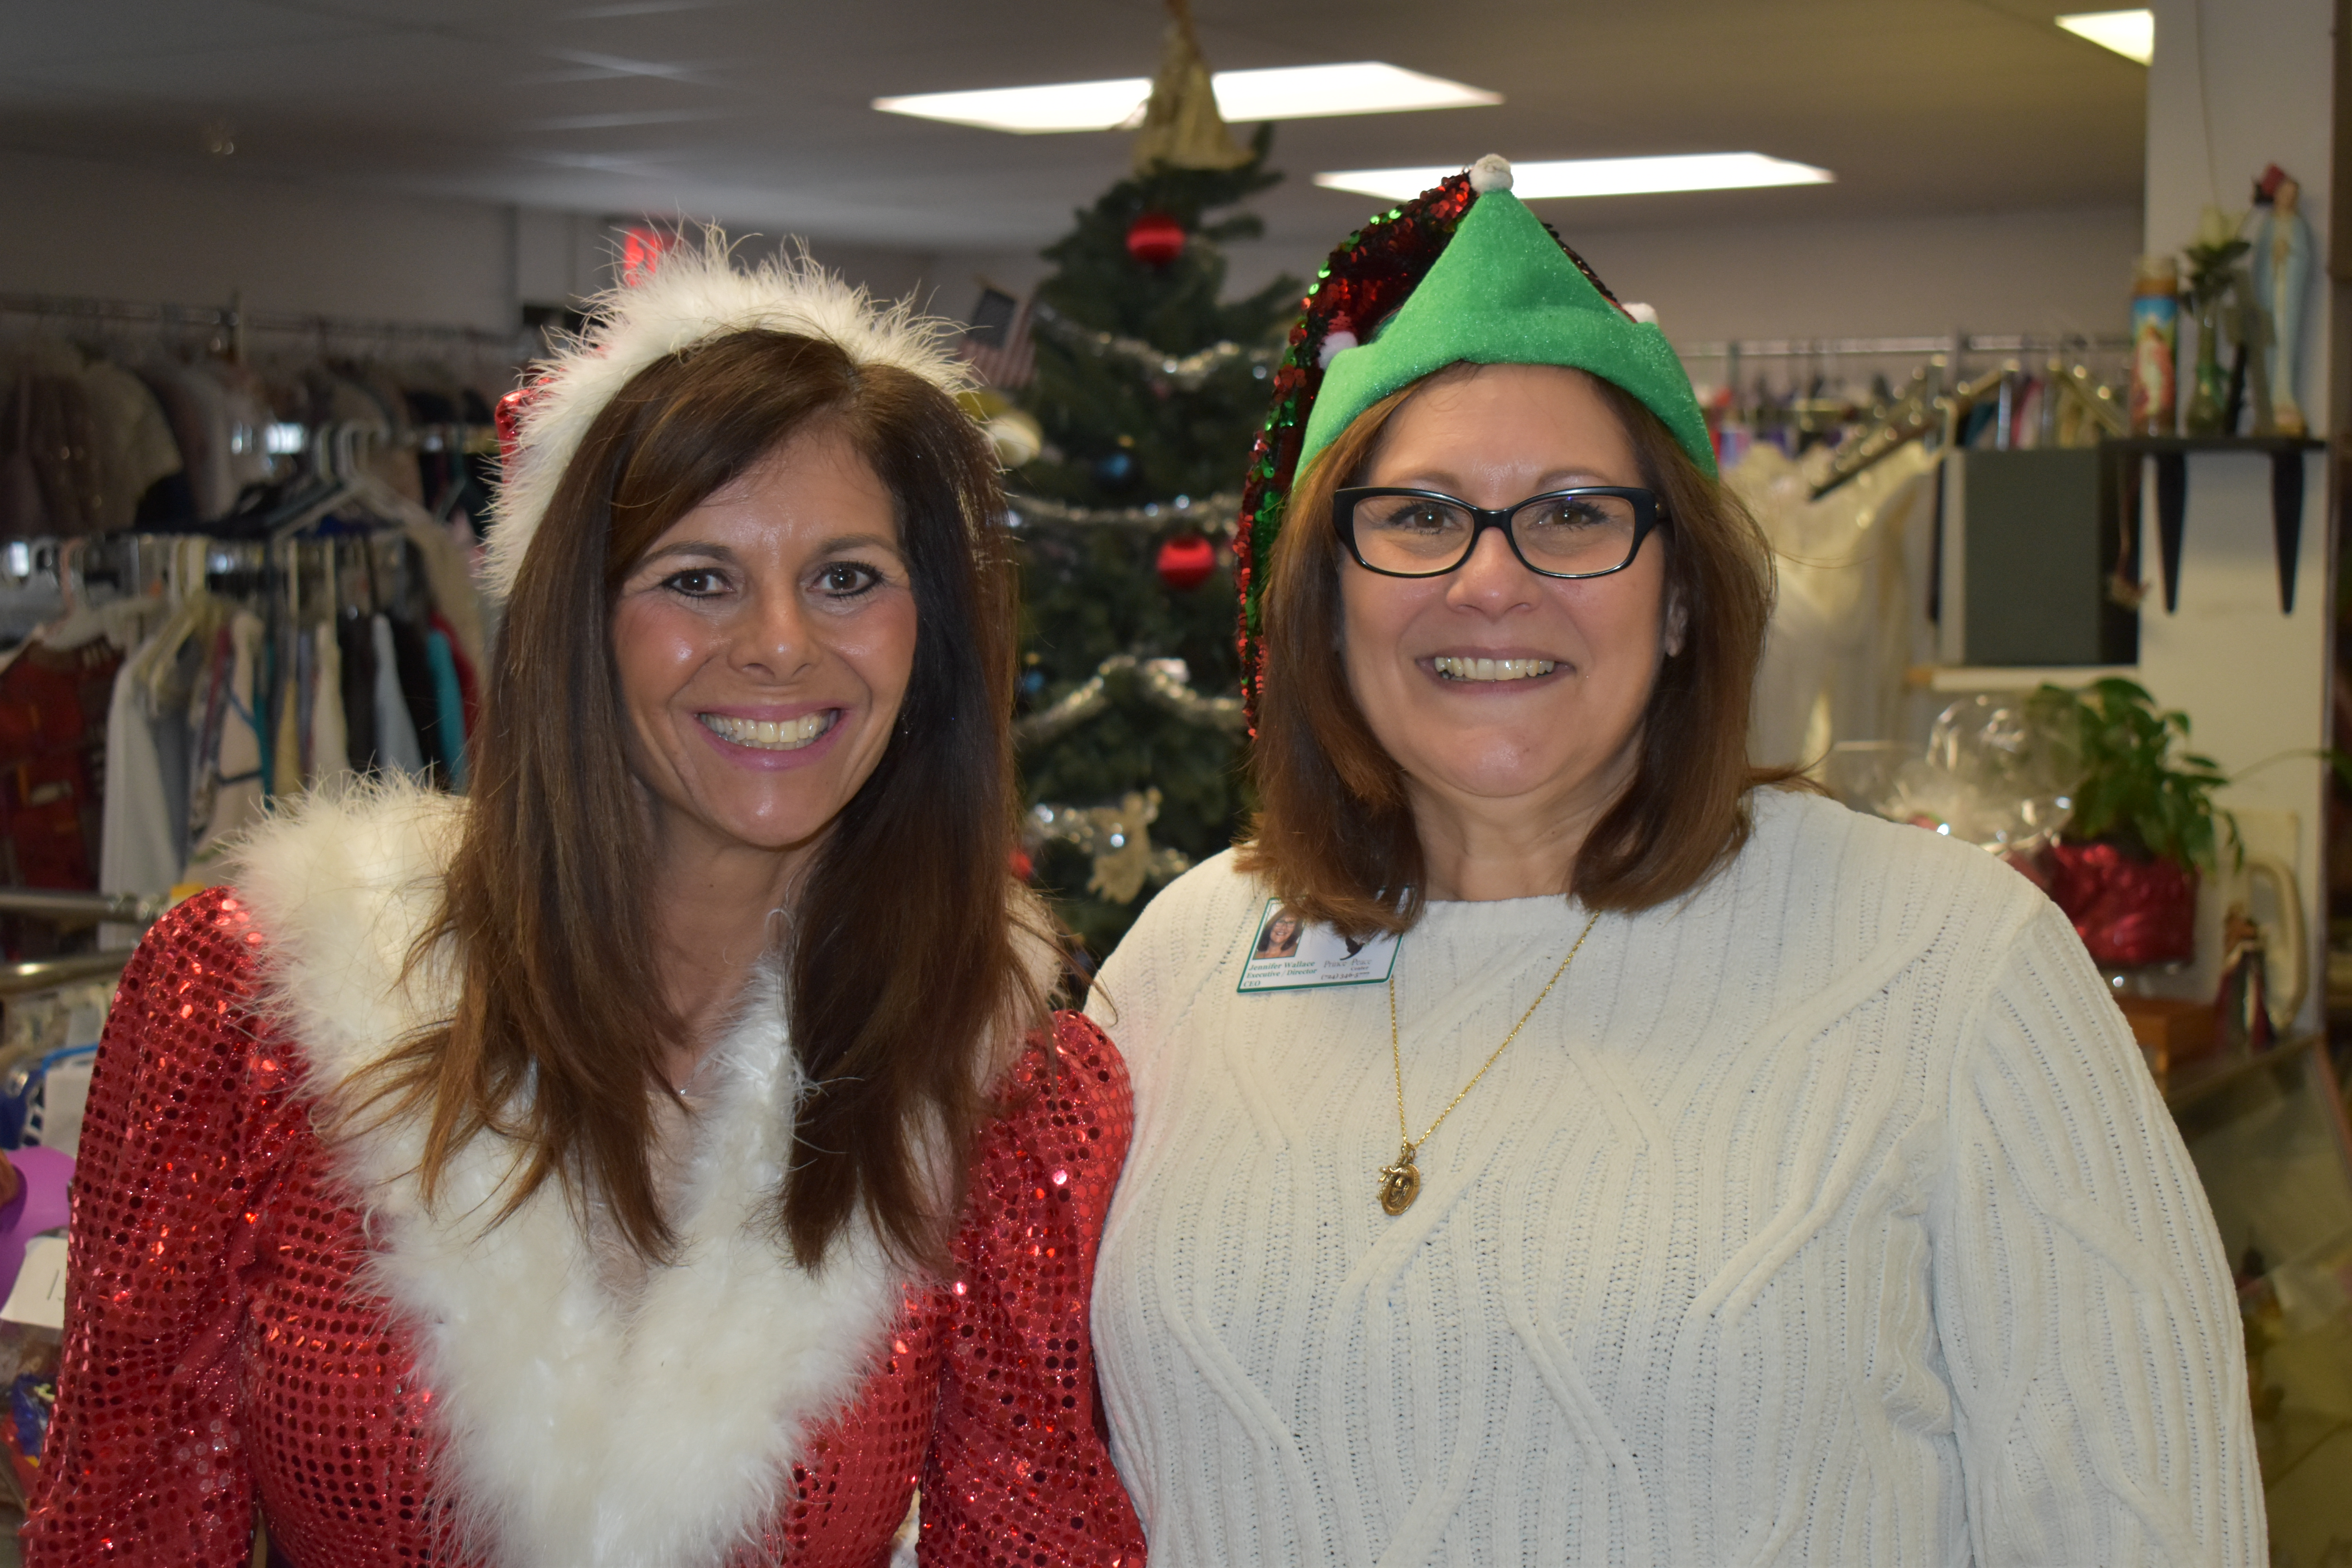 Prince of Peace Center, Farrell, Executive Director Jennifer Wallace, right, and Community Supportive Service Director Natalie Higbee, left, are shown in Christmas costumes for the center's toy giveaway.